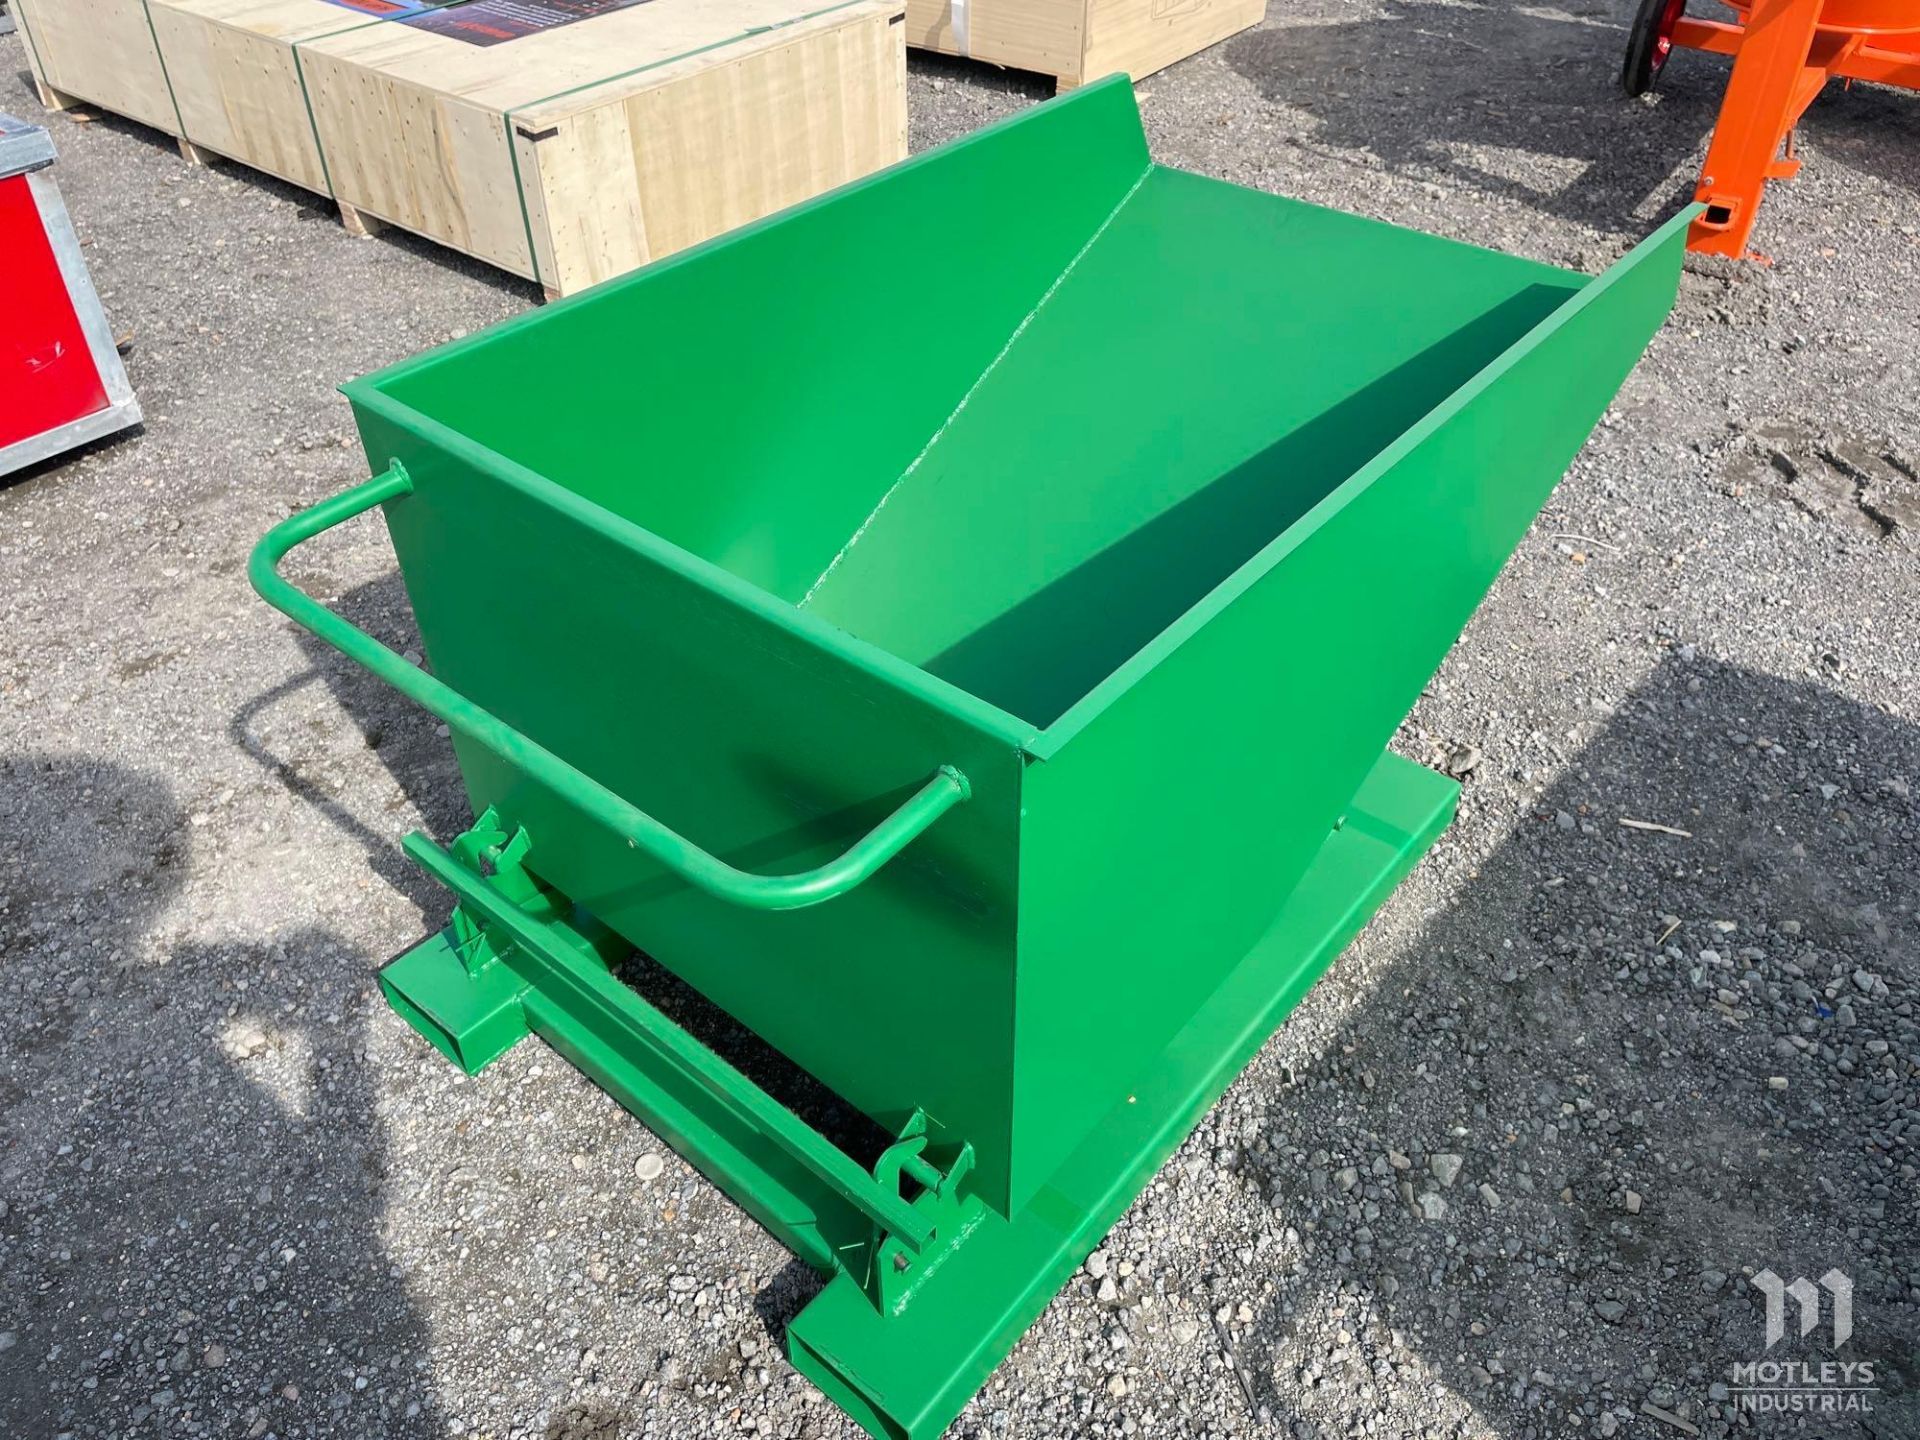 Diggit TG50 Carbon Steel Turnover Box / Hopper - Image 3 of 6